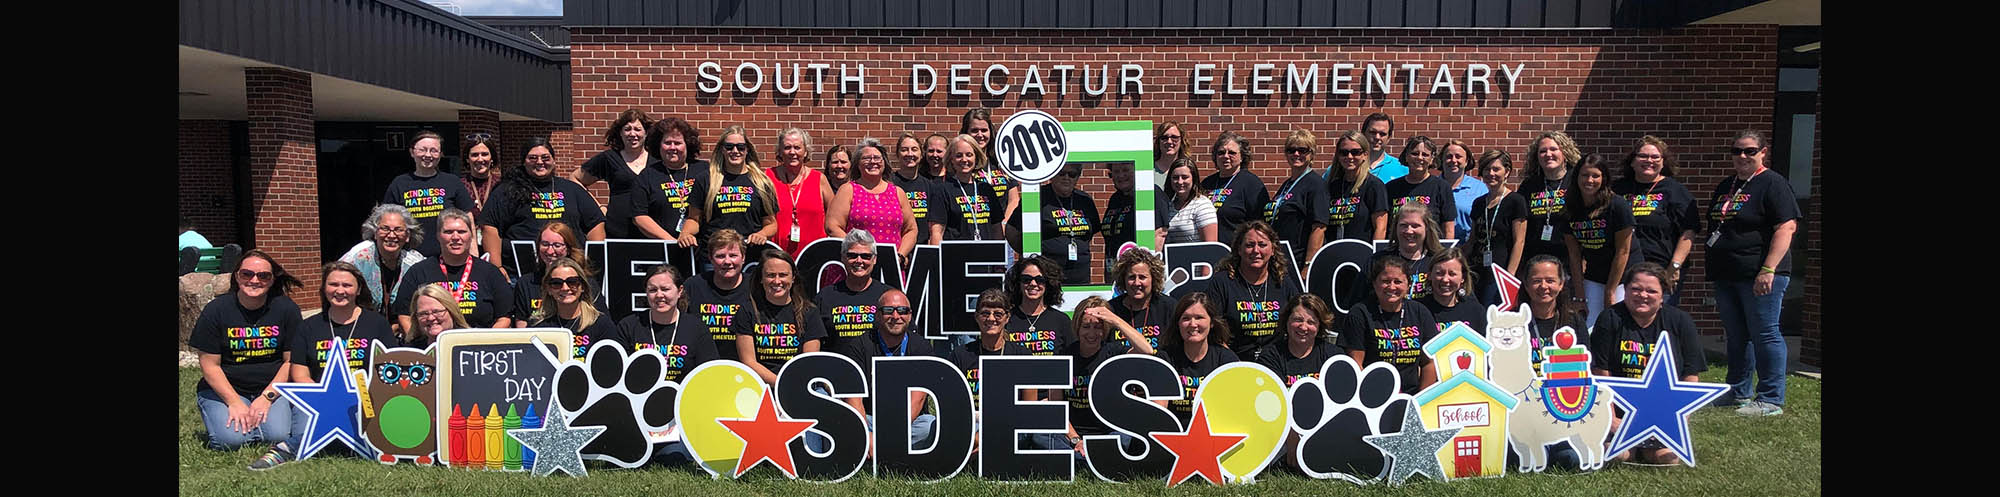 South Decatur Elementary friendly staff in front of their school building